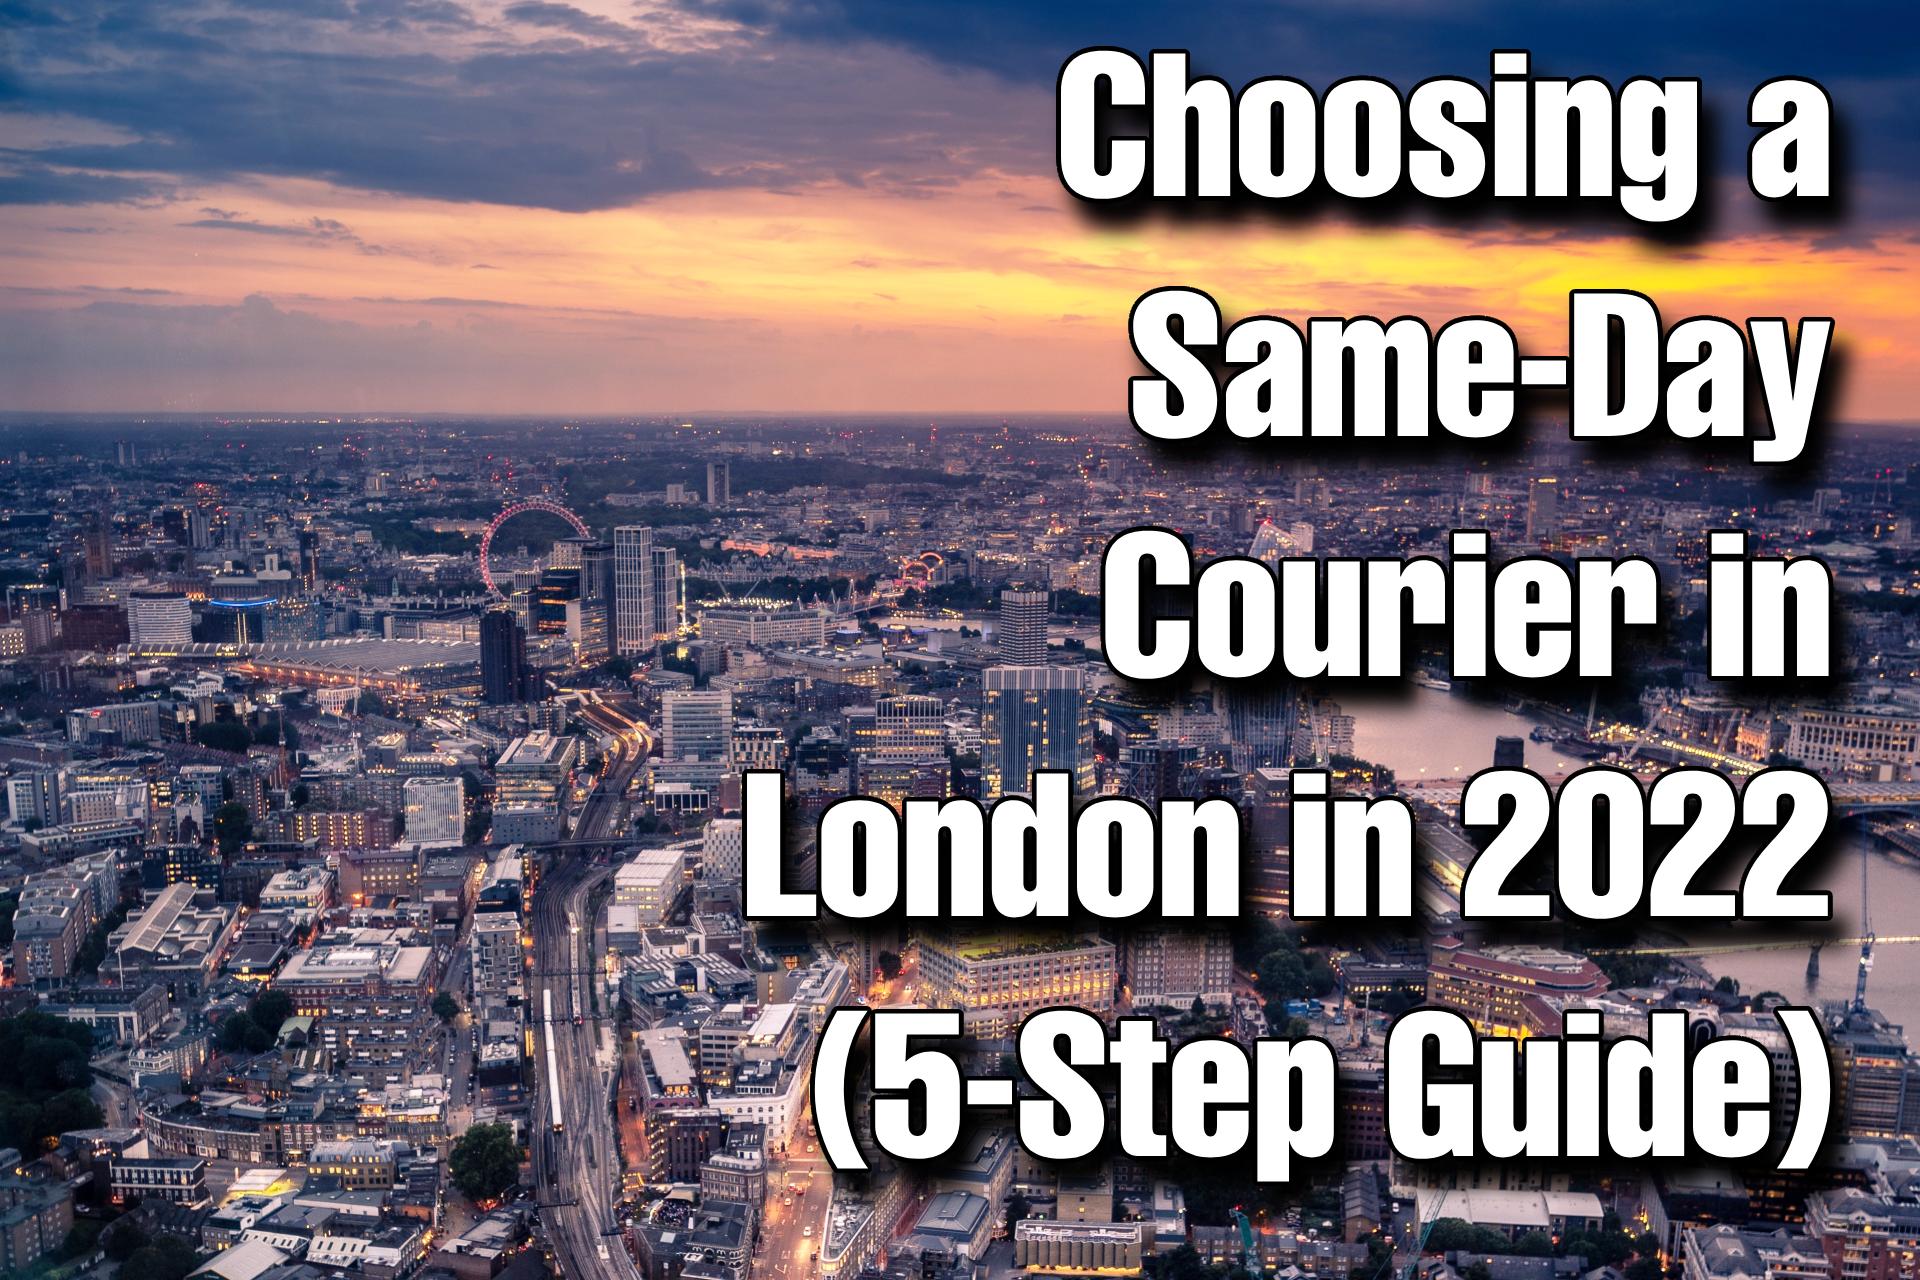 Choosing a Same-Day Courier in London in 2022 (5-Step Guide)